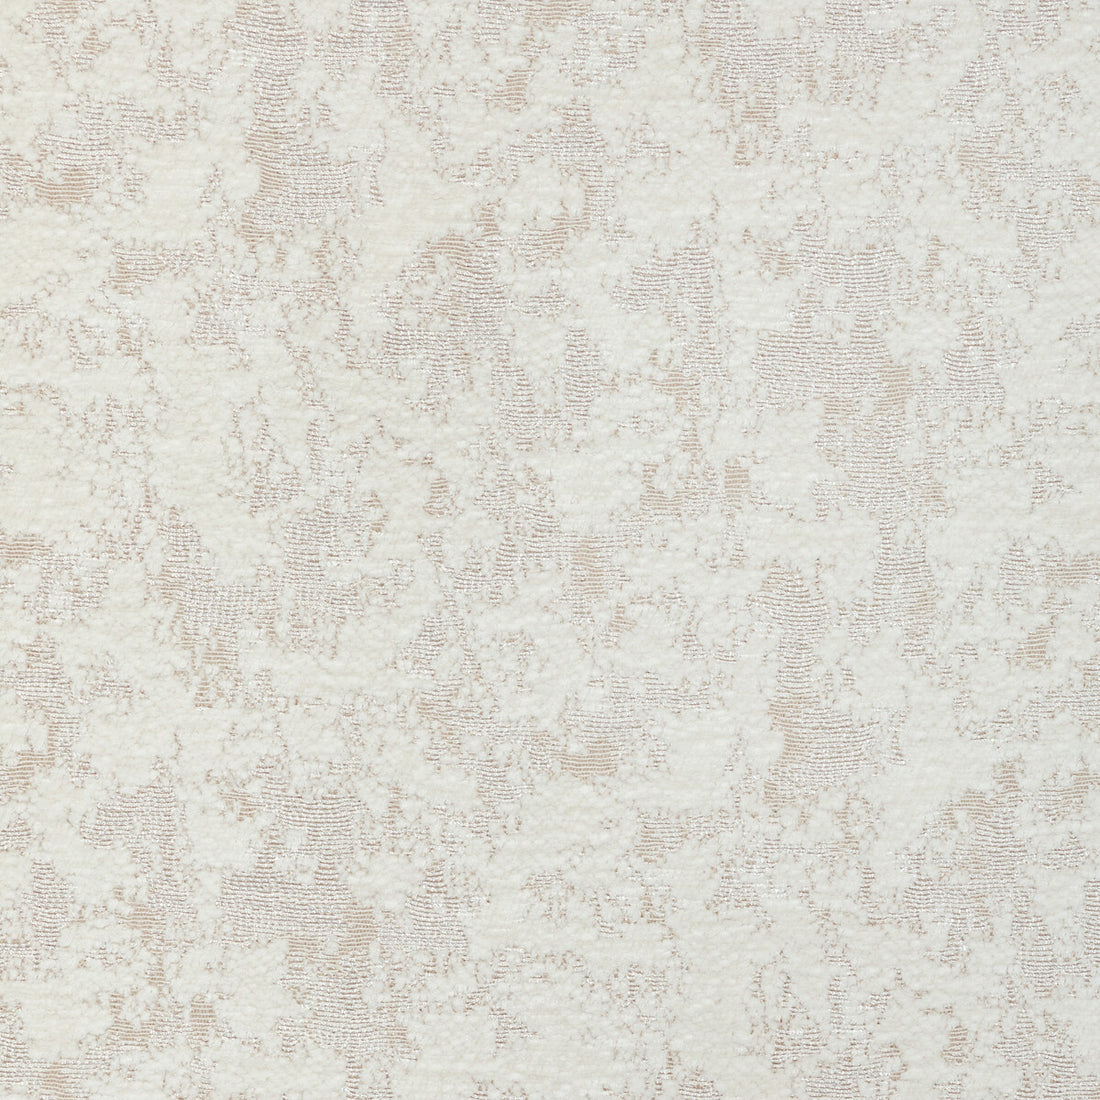 Illumine fabric in ivory color - pattern 36355.101.0 - by Kravet Couture in the Modern Luxe III collection